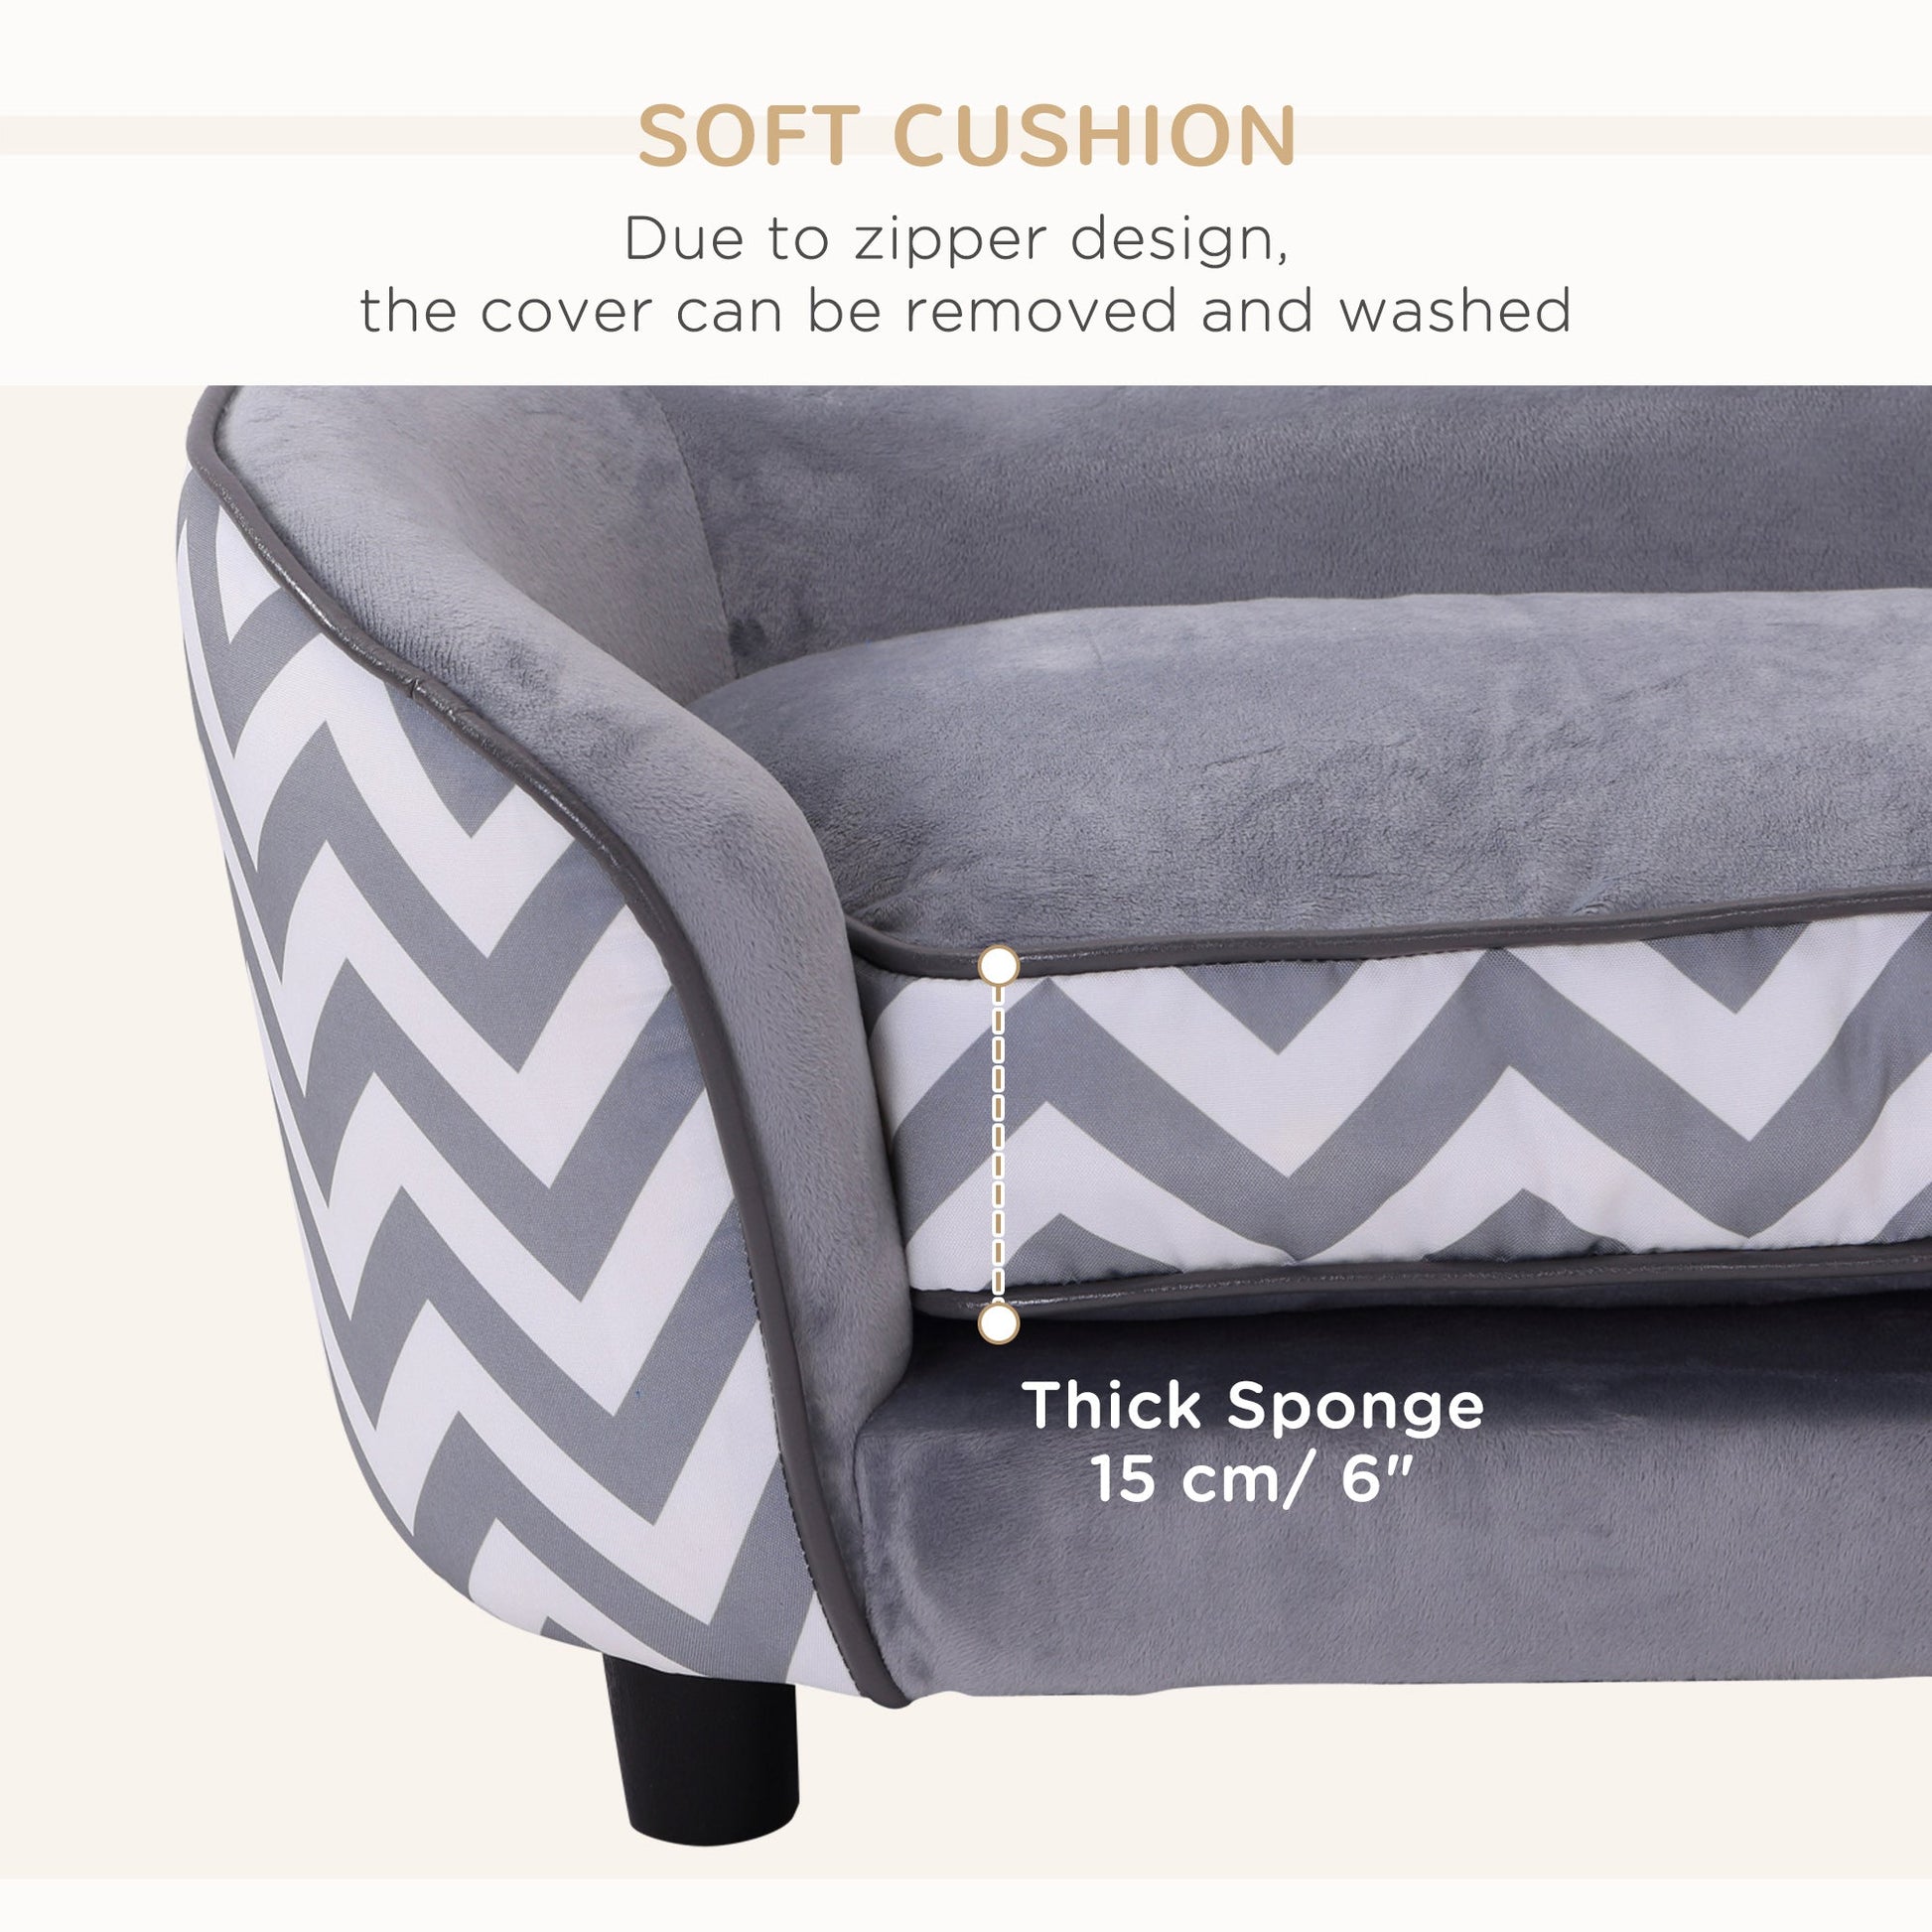 Pet Sofa Elevated Dog Bed Raised Cat Couch Puppy Furniture for Small Sized Dogs with Storage Removable Cushion Cover Grey at Gallery Canada